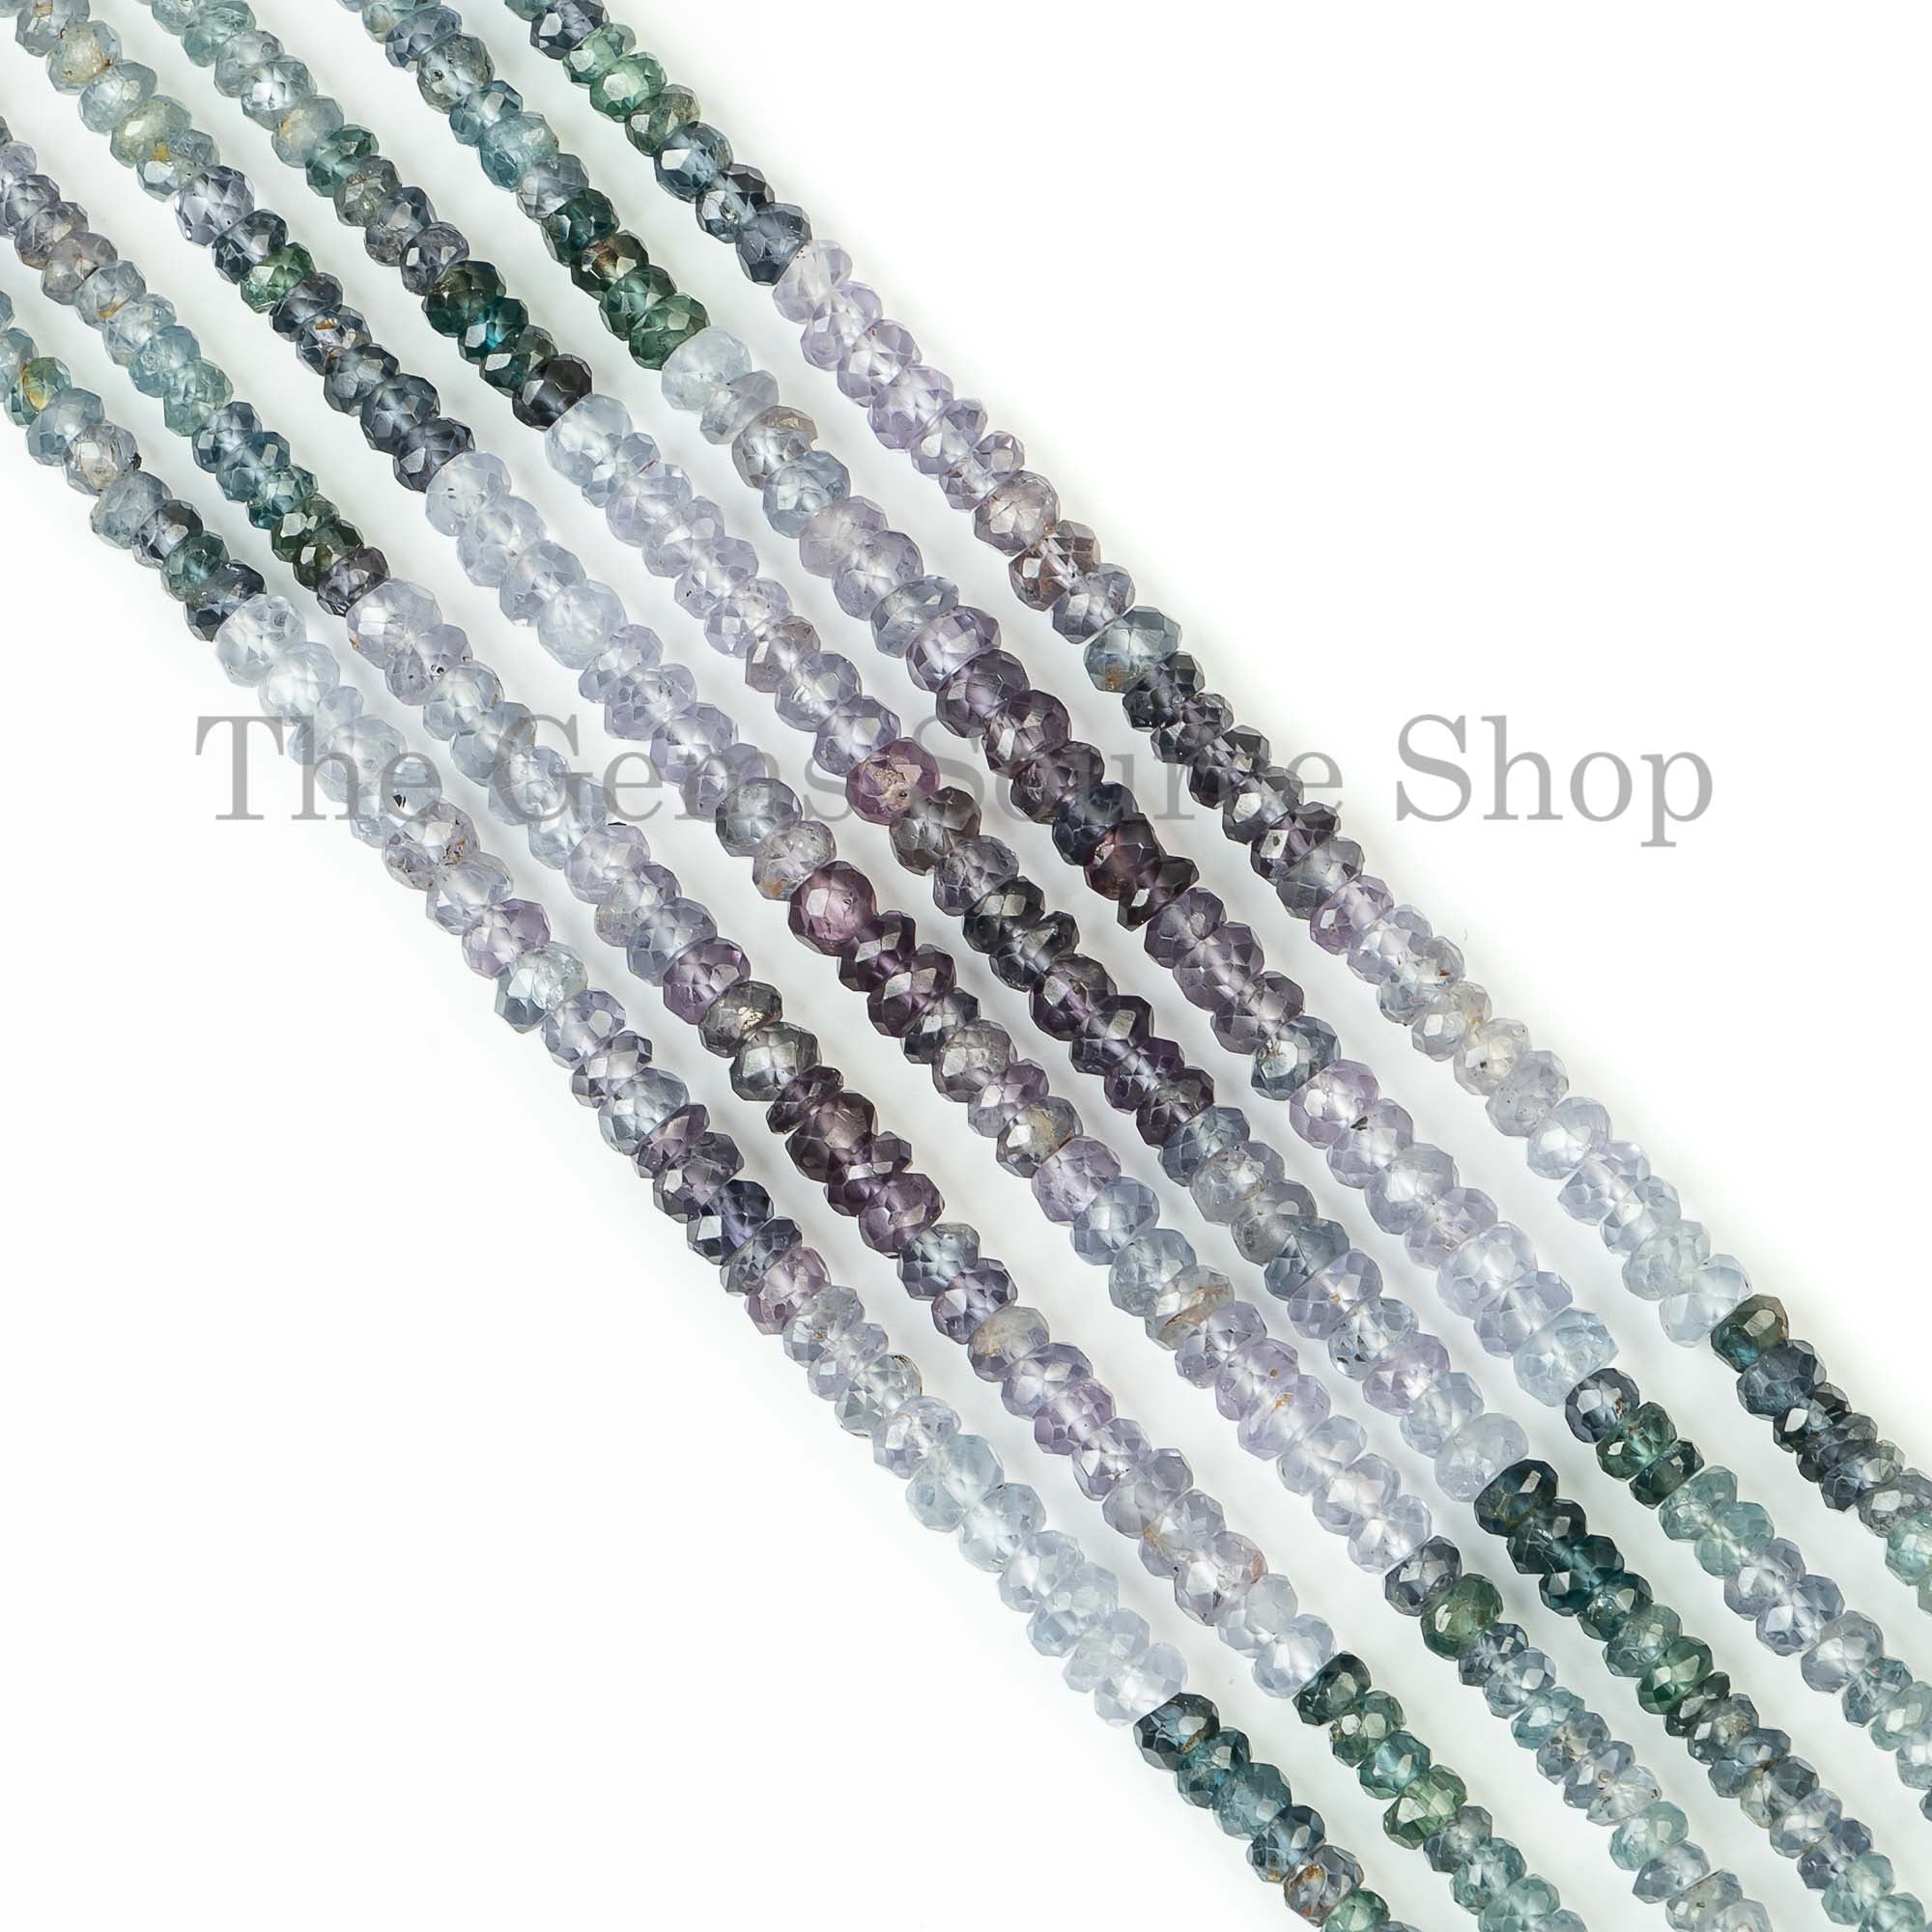 Multi Spinel Faceted Rondelle Shape Beads, Multi Spinel Faceted Beads, Multi Spinel Rondelle Beads